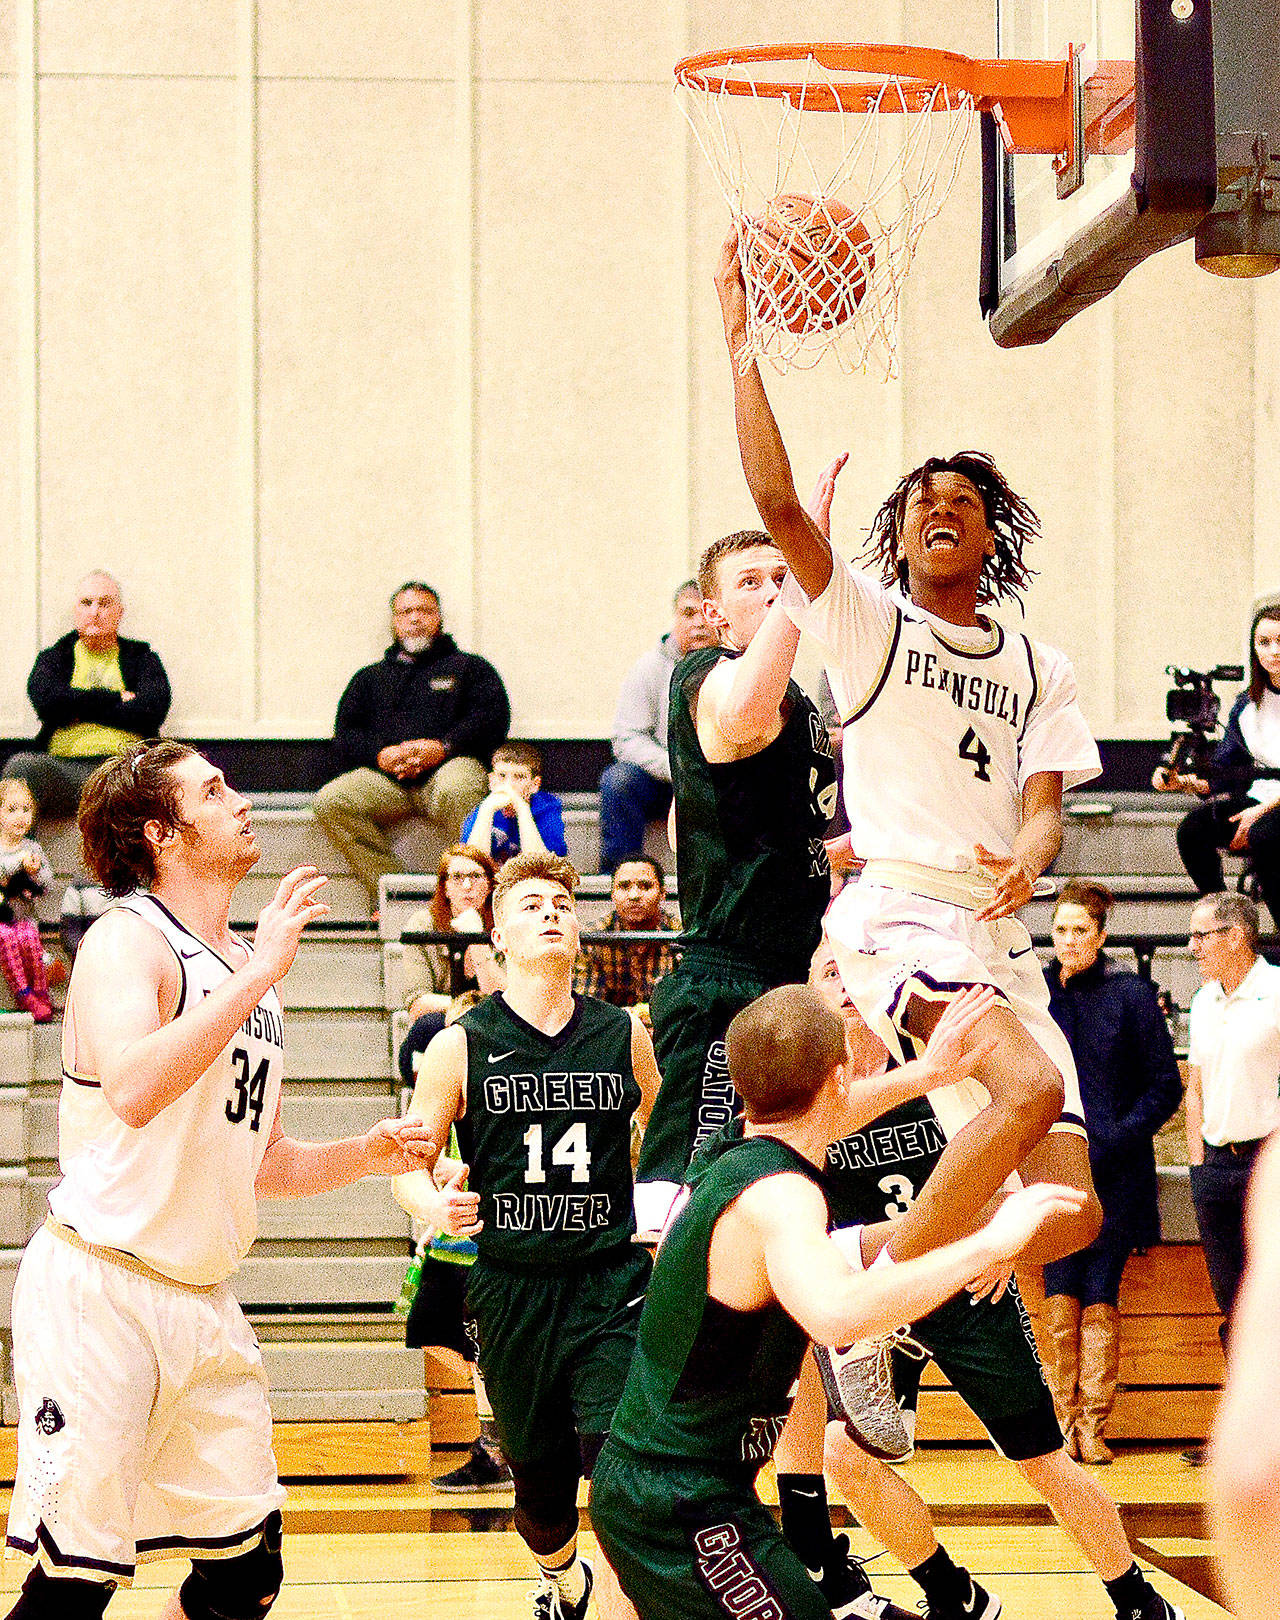 Peninsula’s Kaelin Crane goes up for a layup against Green River in Peninsula’s 82-61 win Saturday night. In on the play is Peninsula’s Marky Adams (34). (Jay Cline/for Peninsula Daily News)